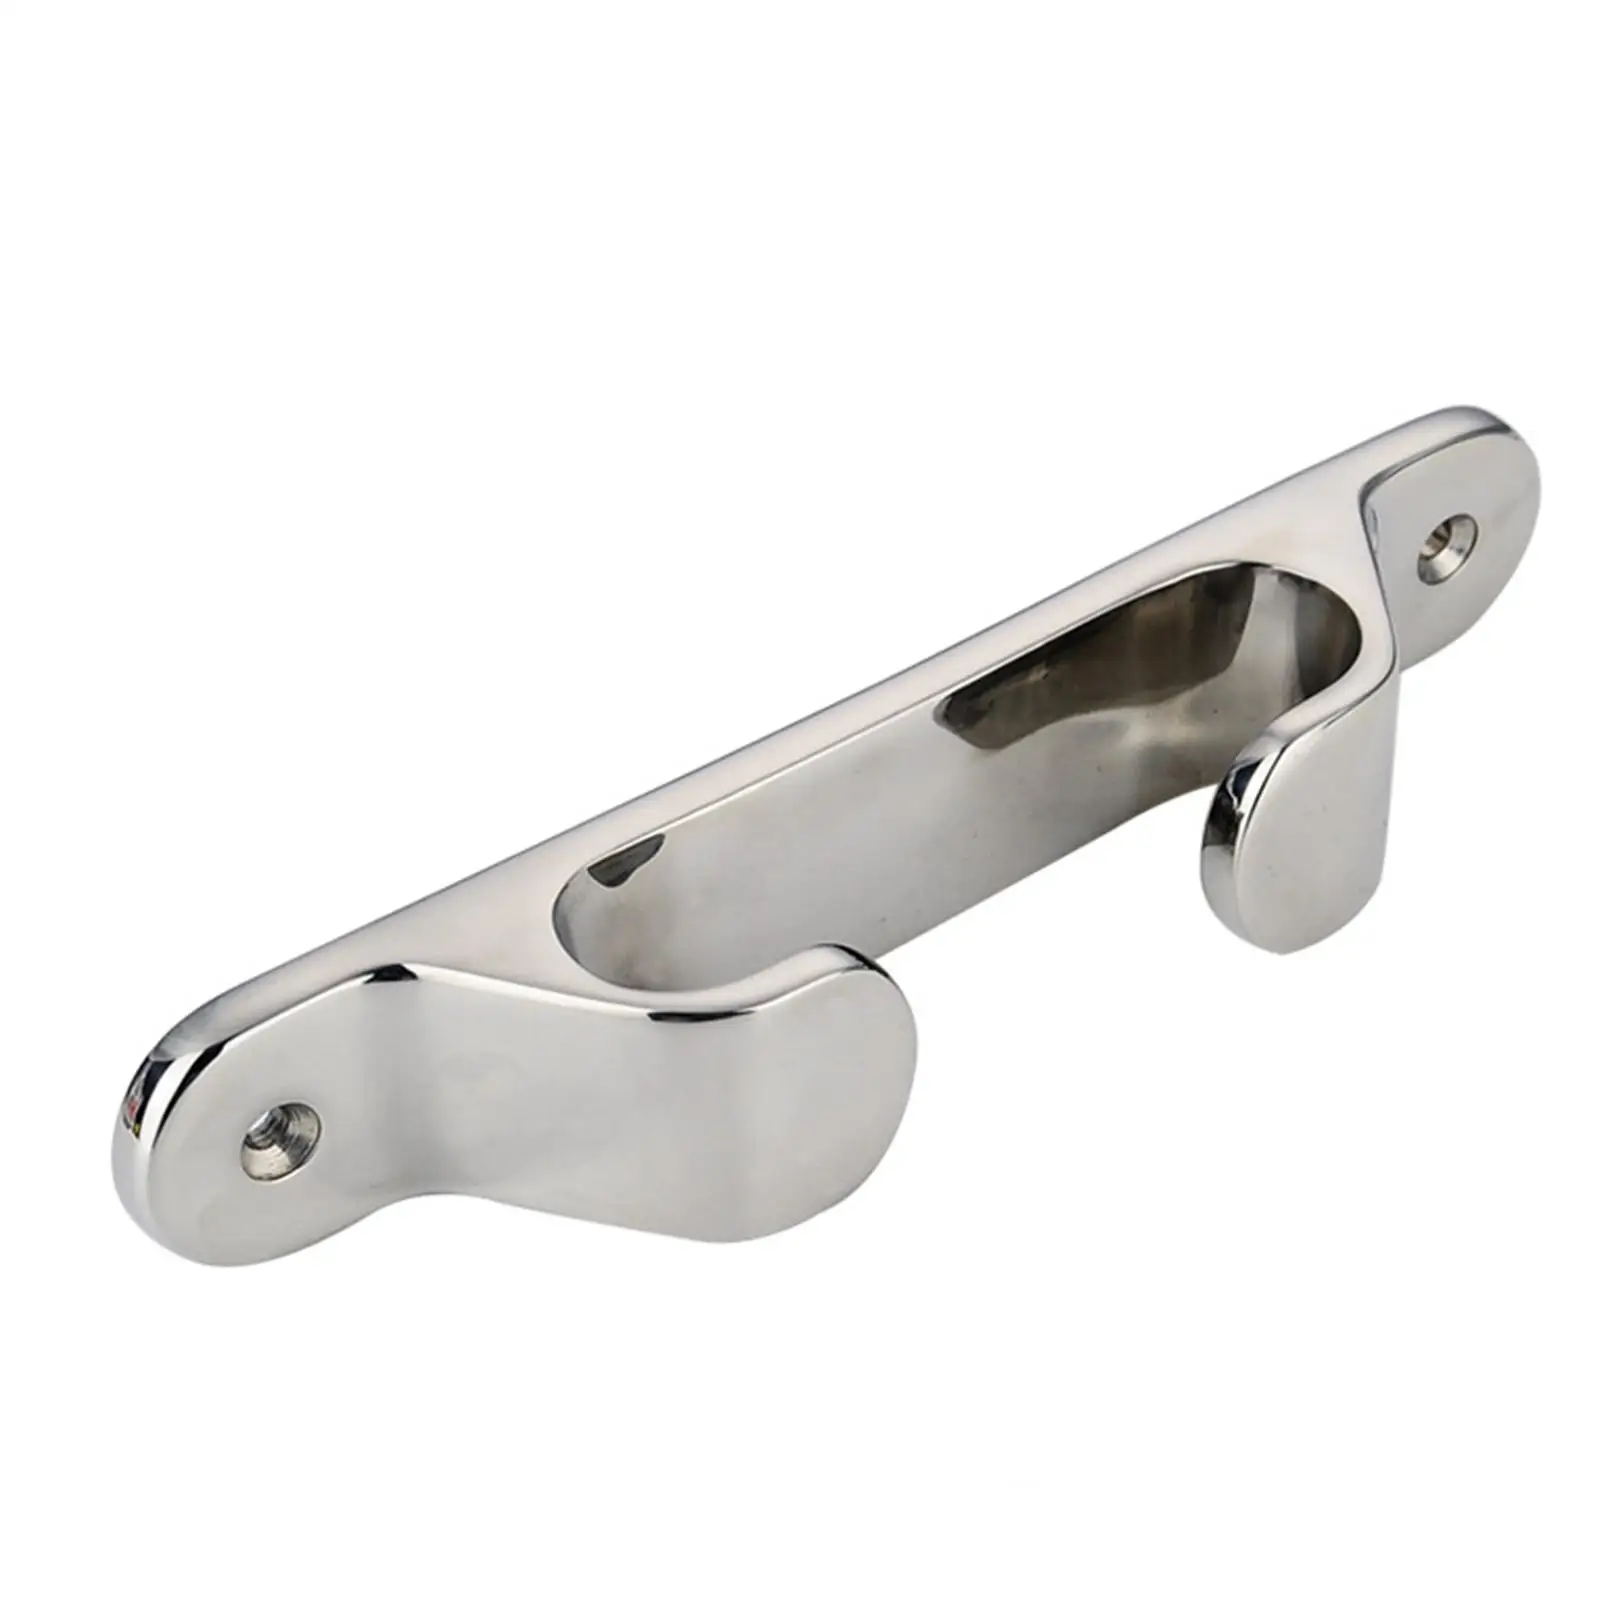 

4in Straight Fairlead Bow Chock Hardware Boat 102mm Rope Guide Line Cleat for Marine Yacht Smooth Surface Line Cleats